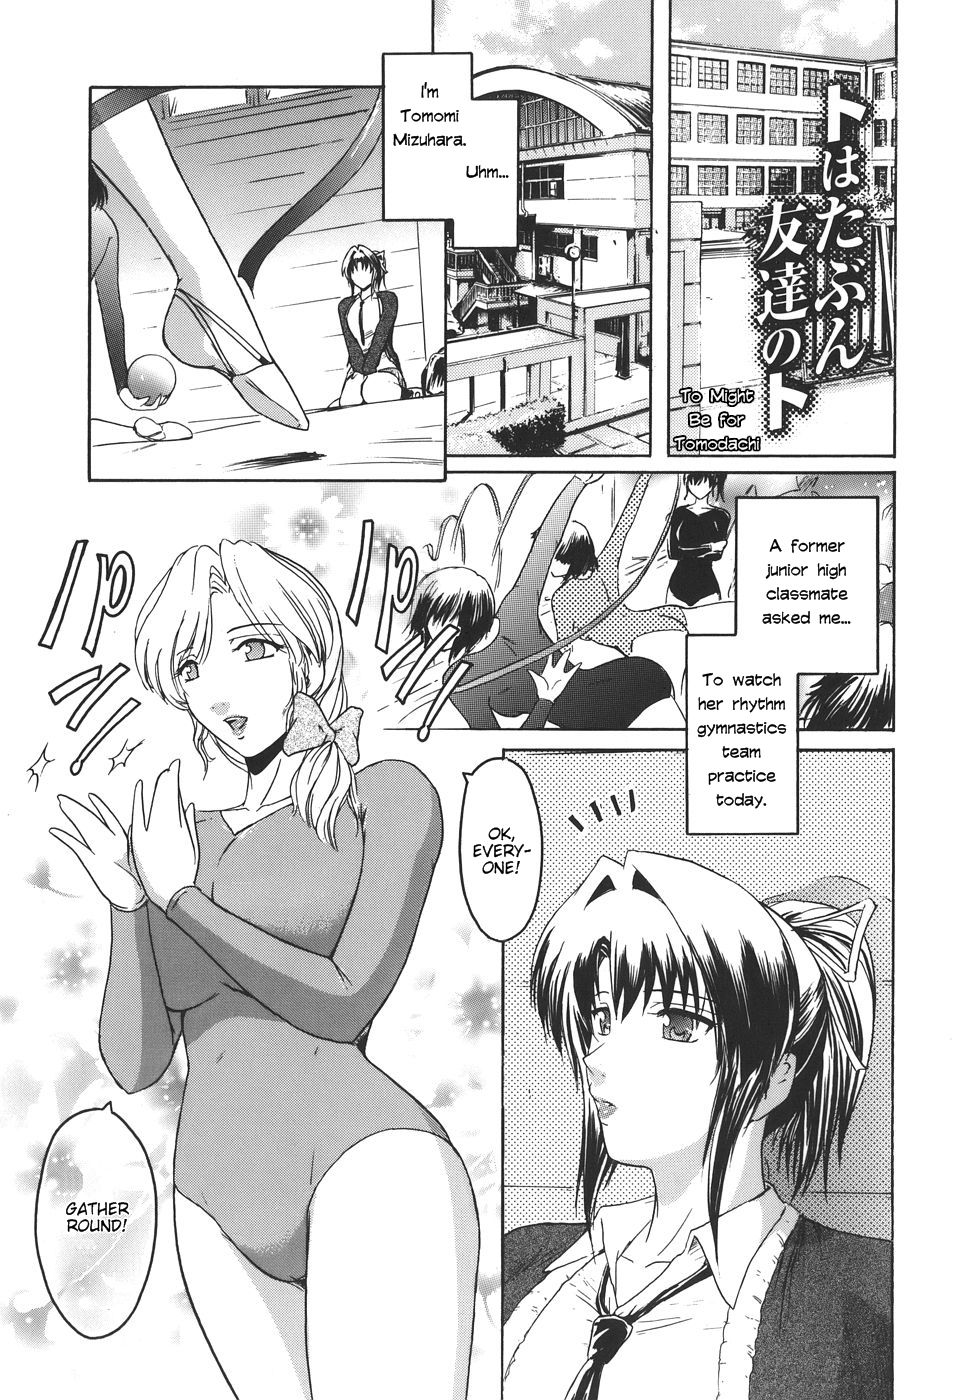 Hentai Manga Comic-Virgin-Chapter 5 - to might be for tomodachi-1